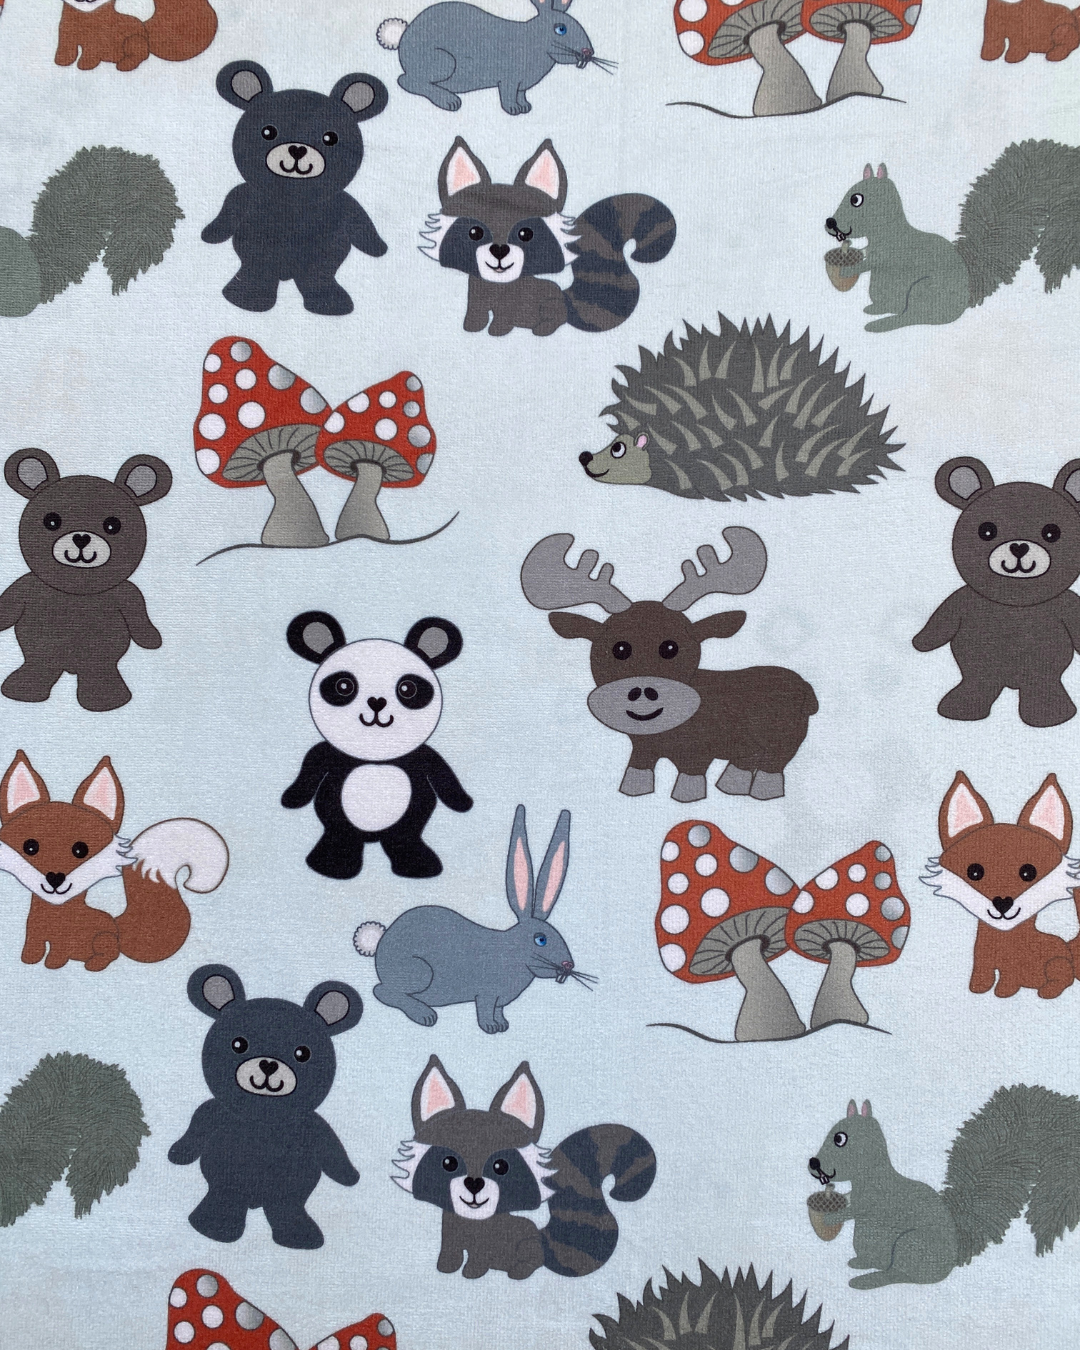 Giant Towel: Forest Animals and Mushrooms